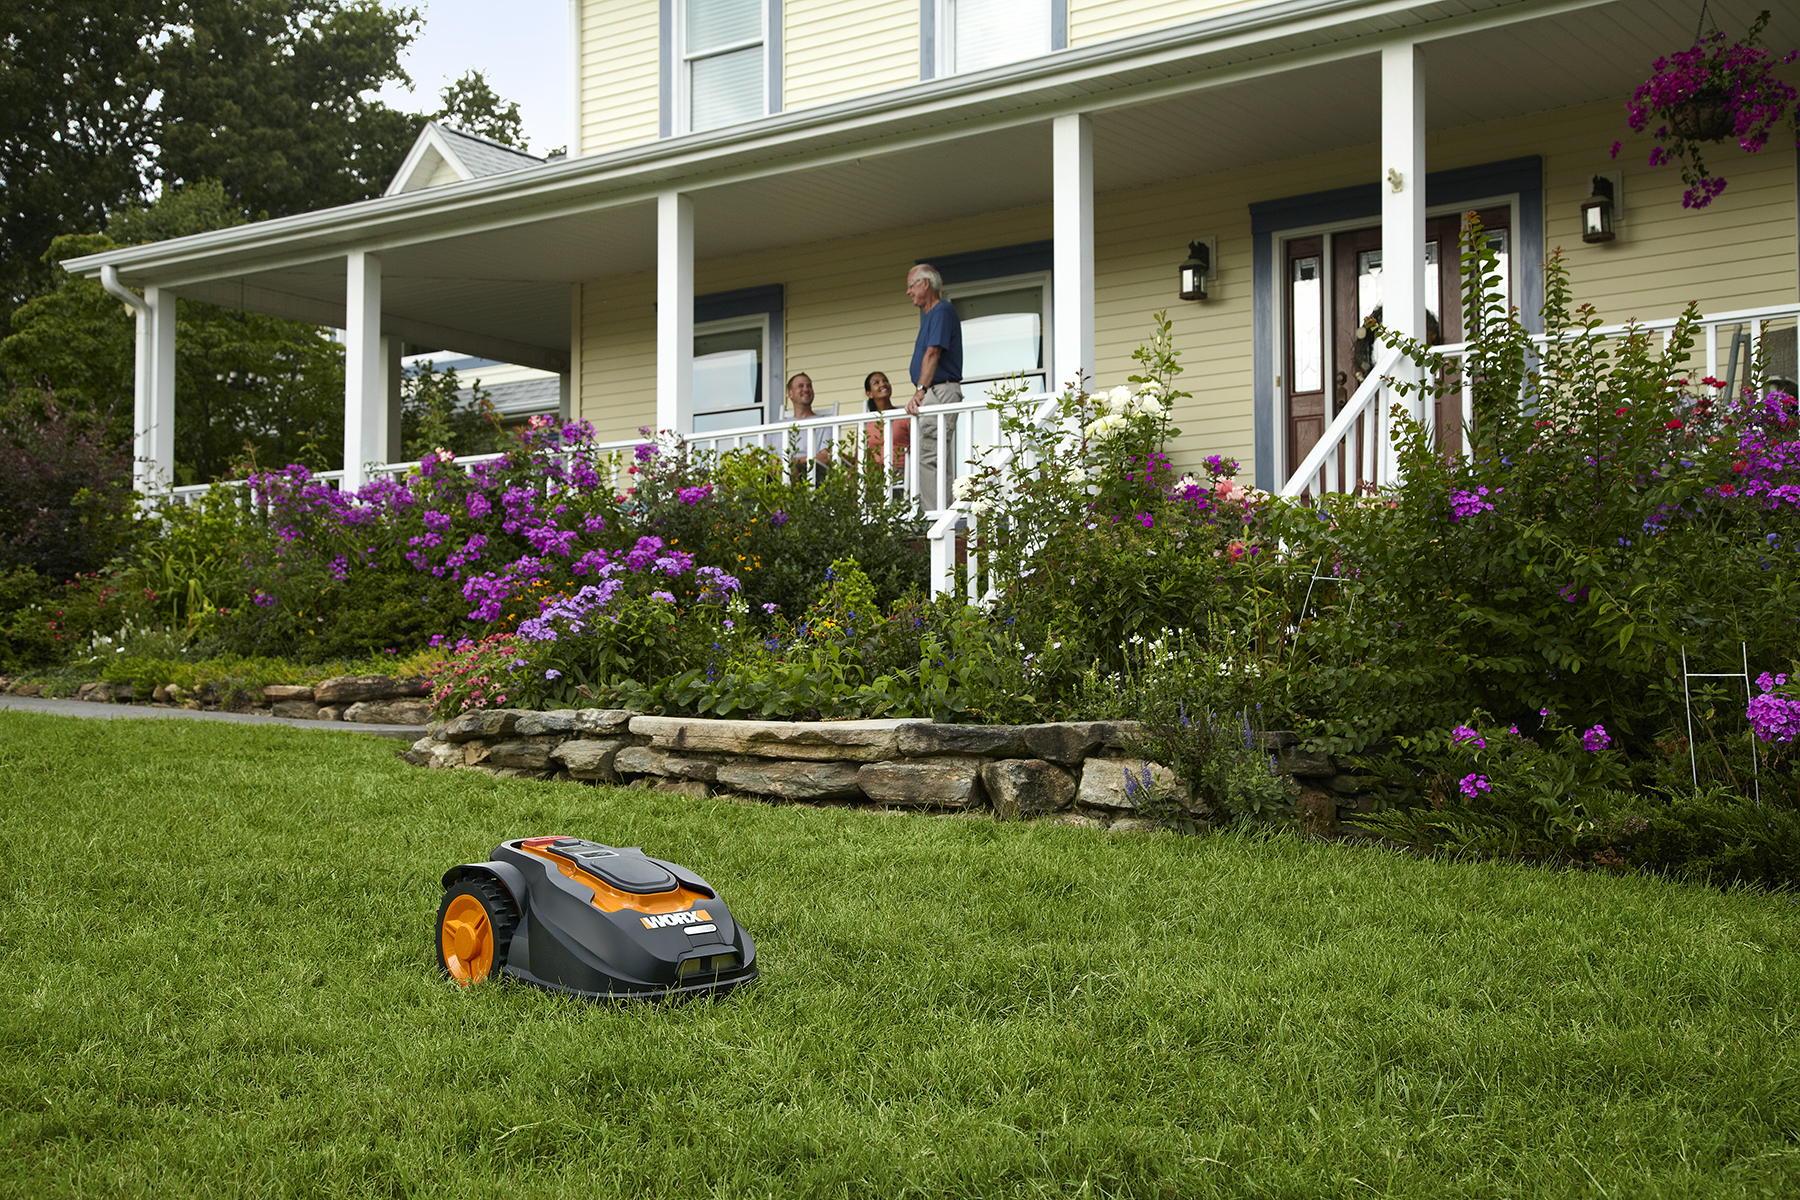 WORX Landroid is designed to maintain grass cutting heights of lawns up to a quarter acre.